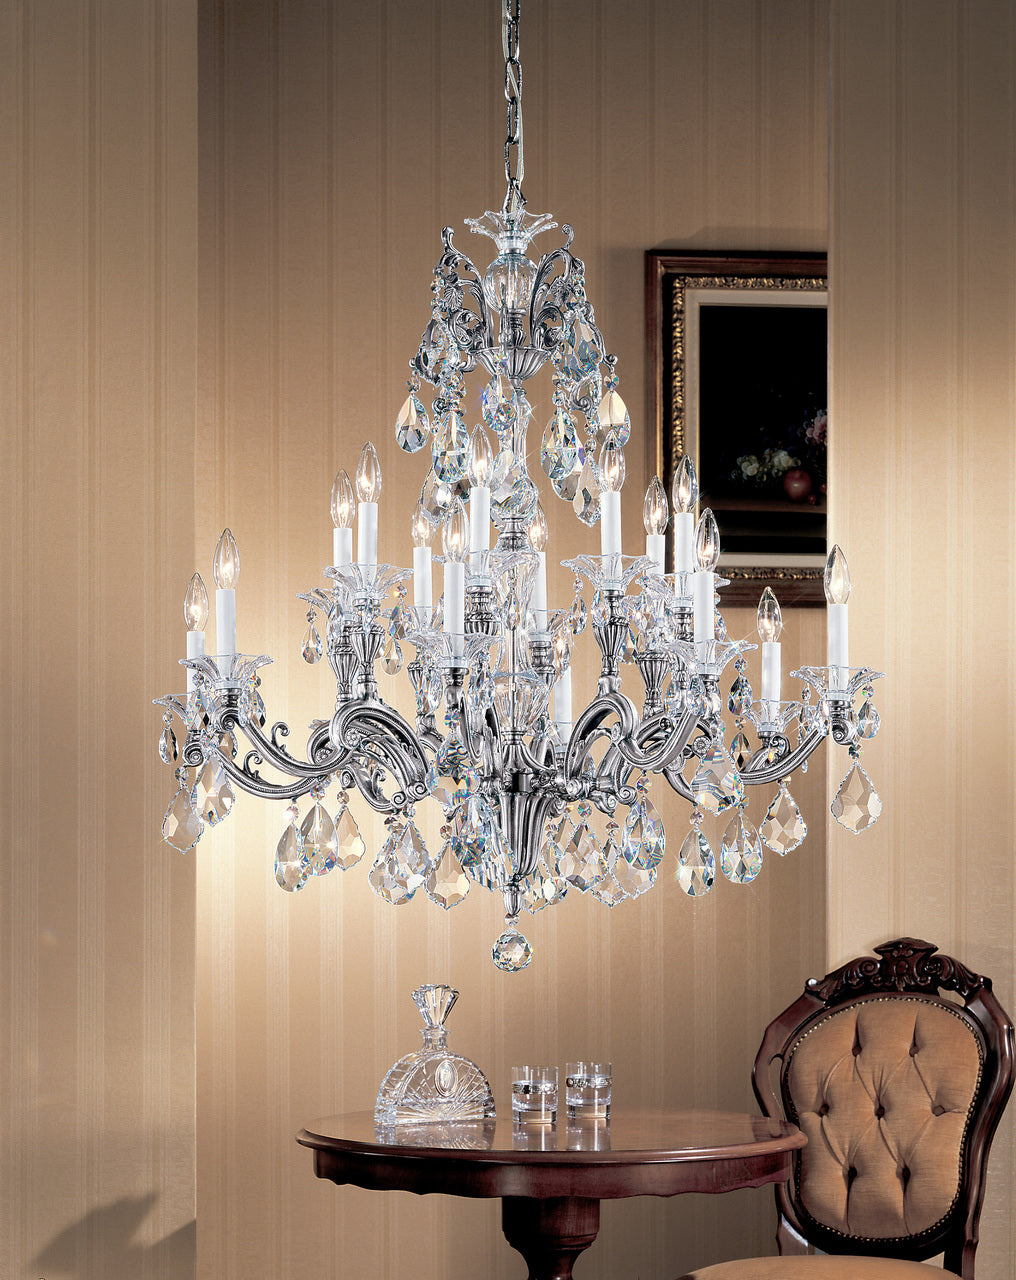 Classic Lighting 57116 RB SC Via Firenze Crystal Chandelier in Roman Bronze (Imported from Spain)